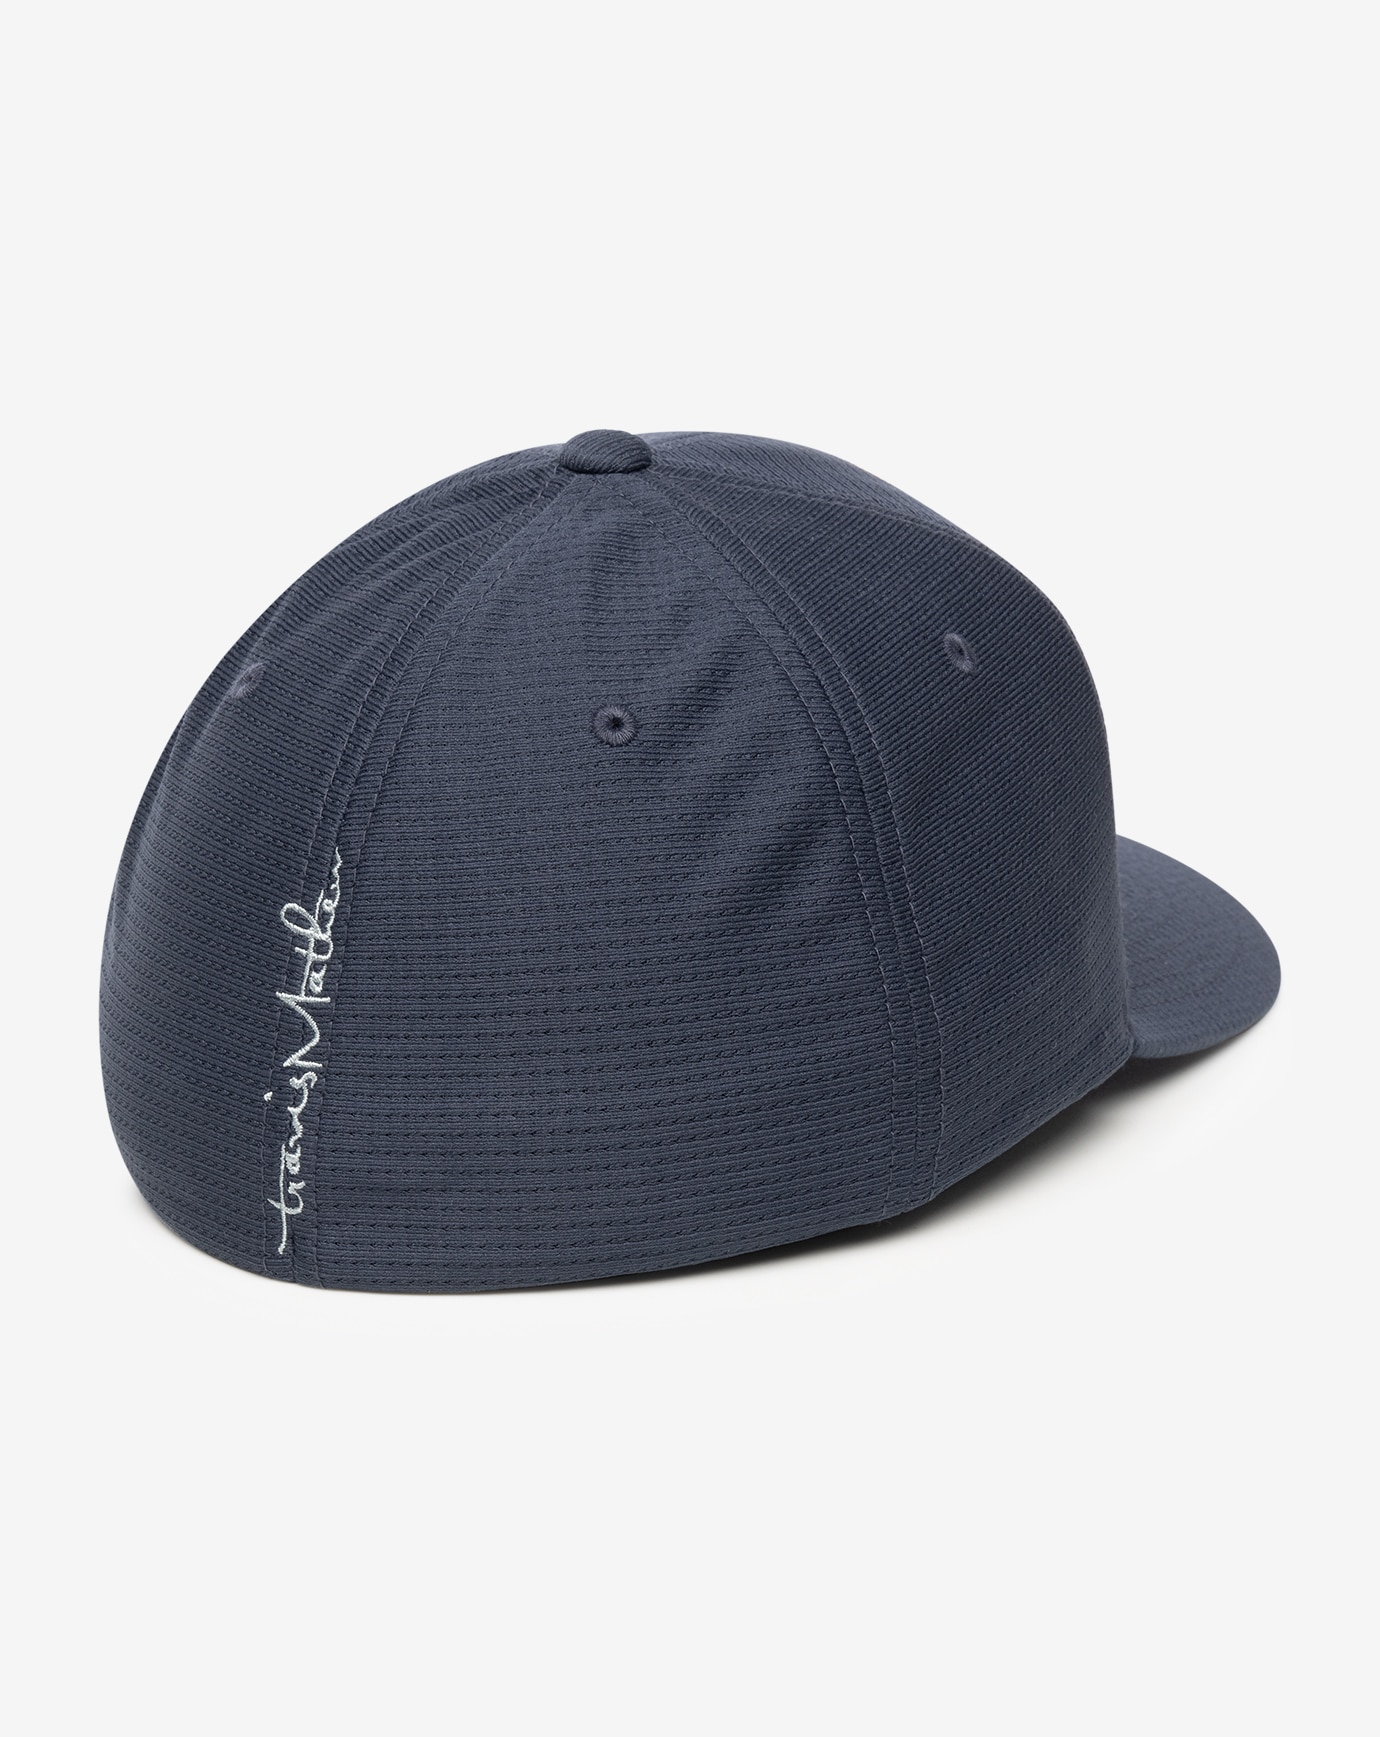 HOP BOULDERS FITTED HAT Image Thumbnail 3